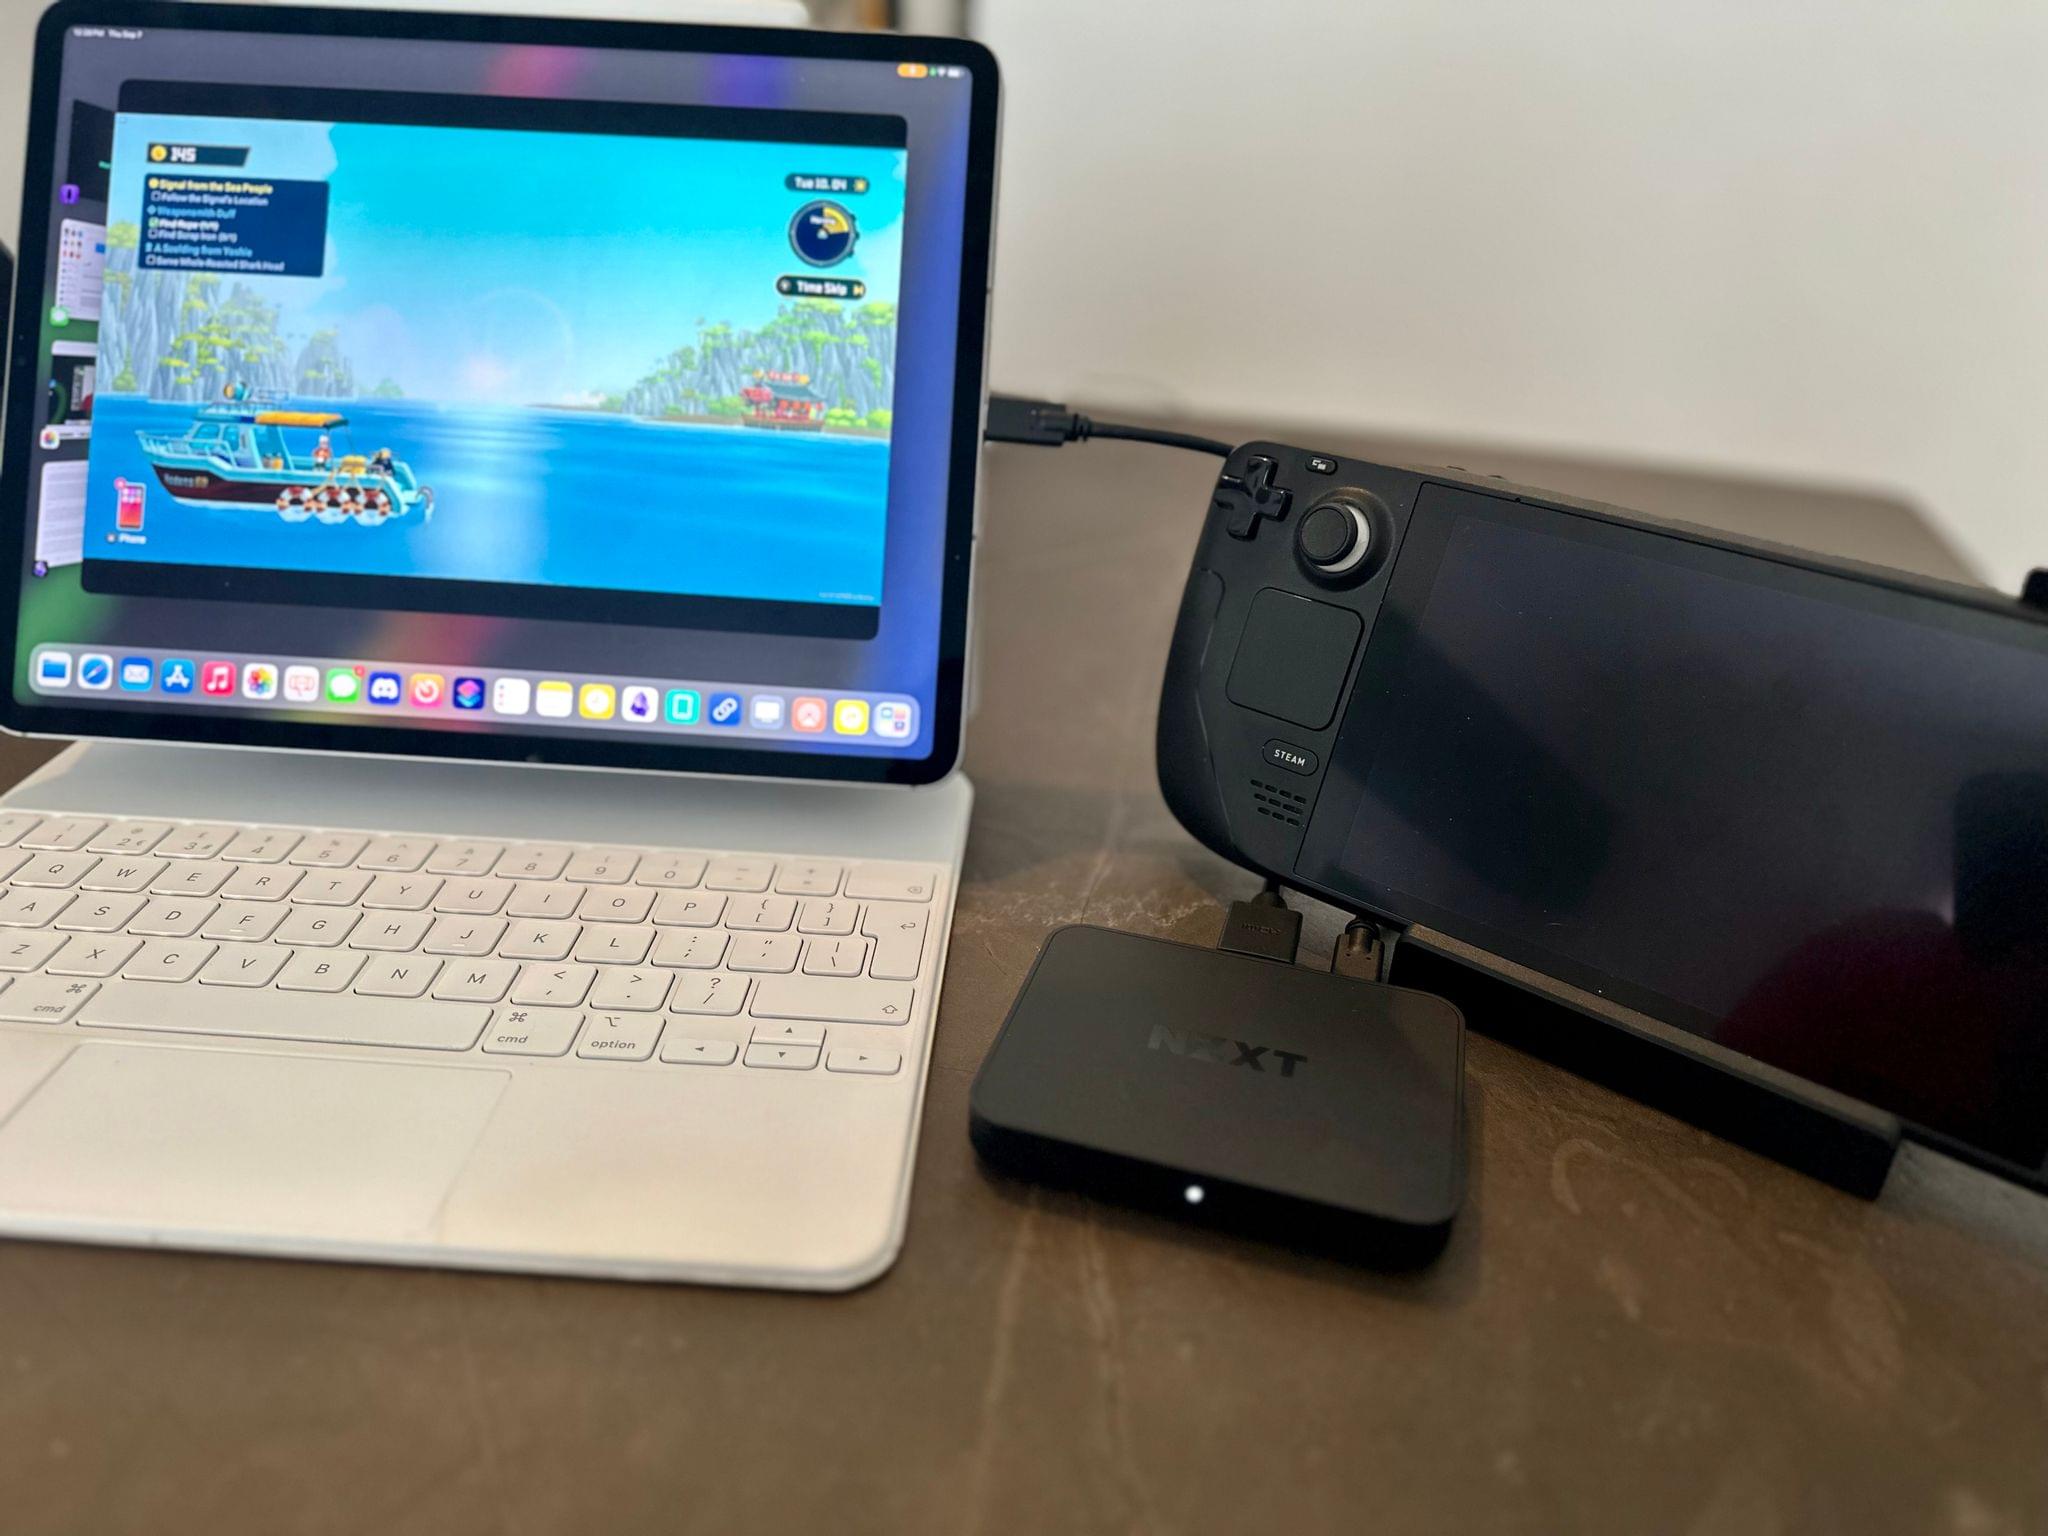 iPad Pro, Steam Deck with dock, and NZXT capture card.